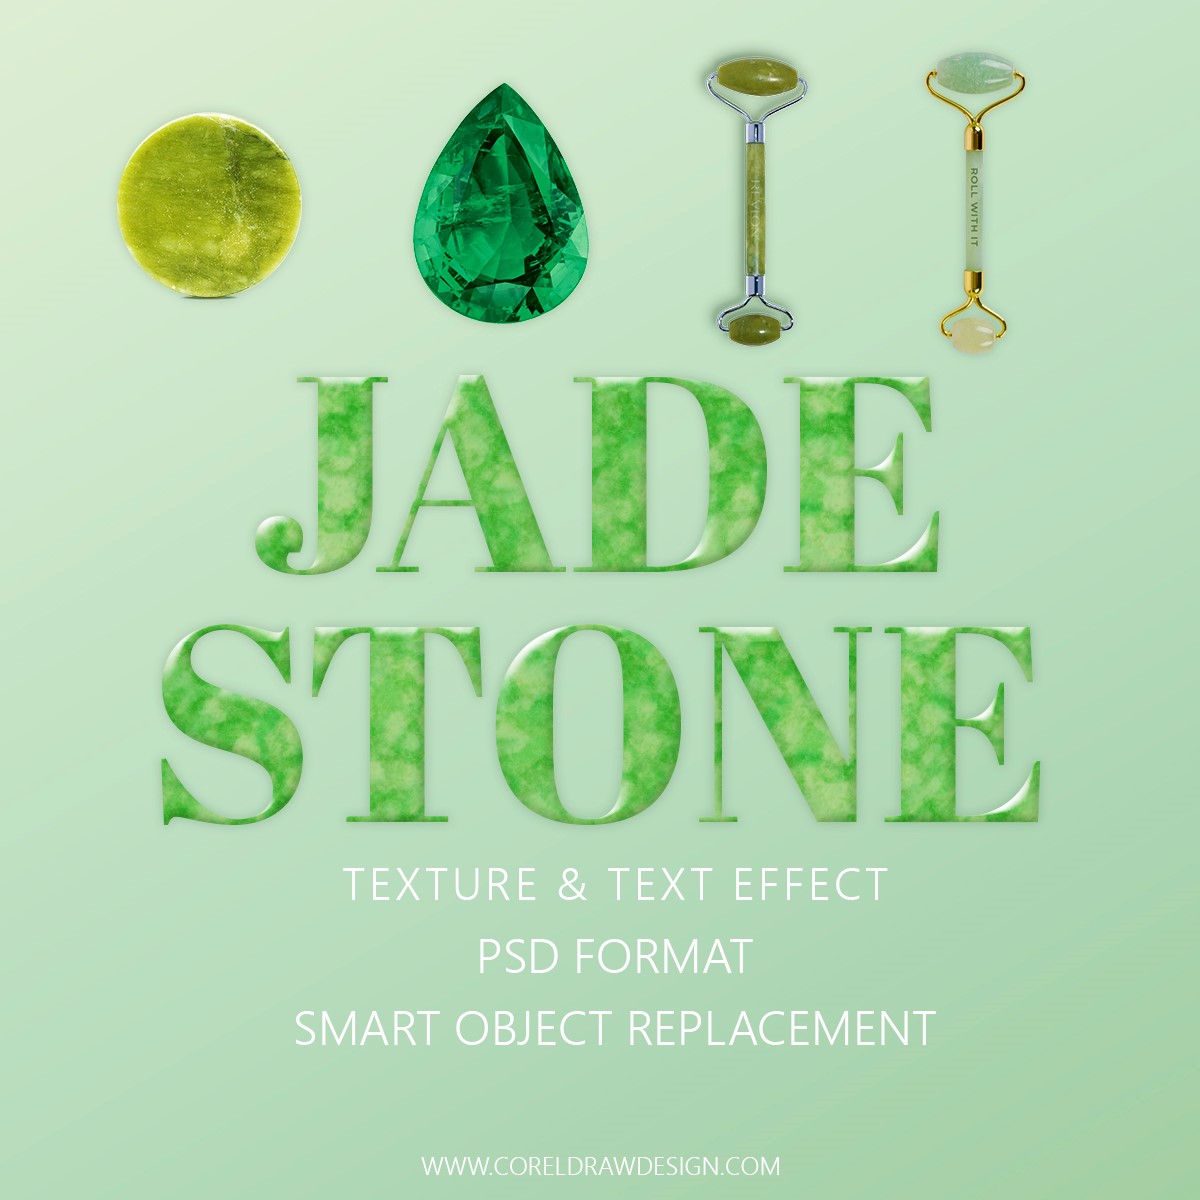 Royal Jade Stone Texture and text effect